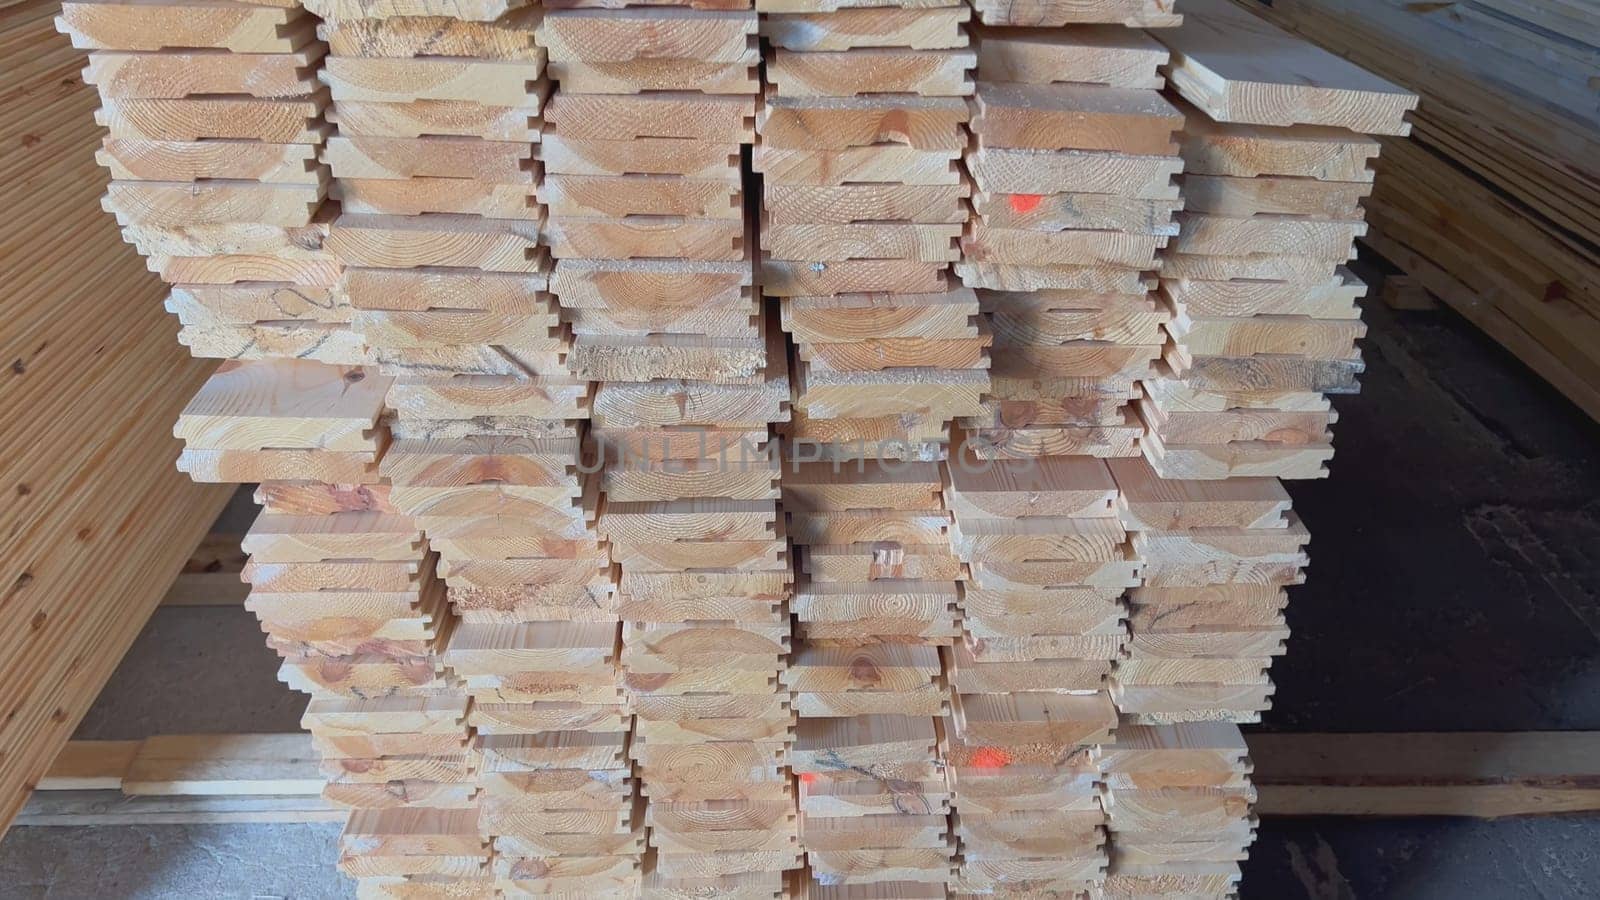 Sawn timber in the store